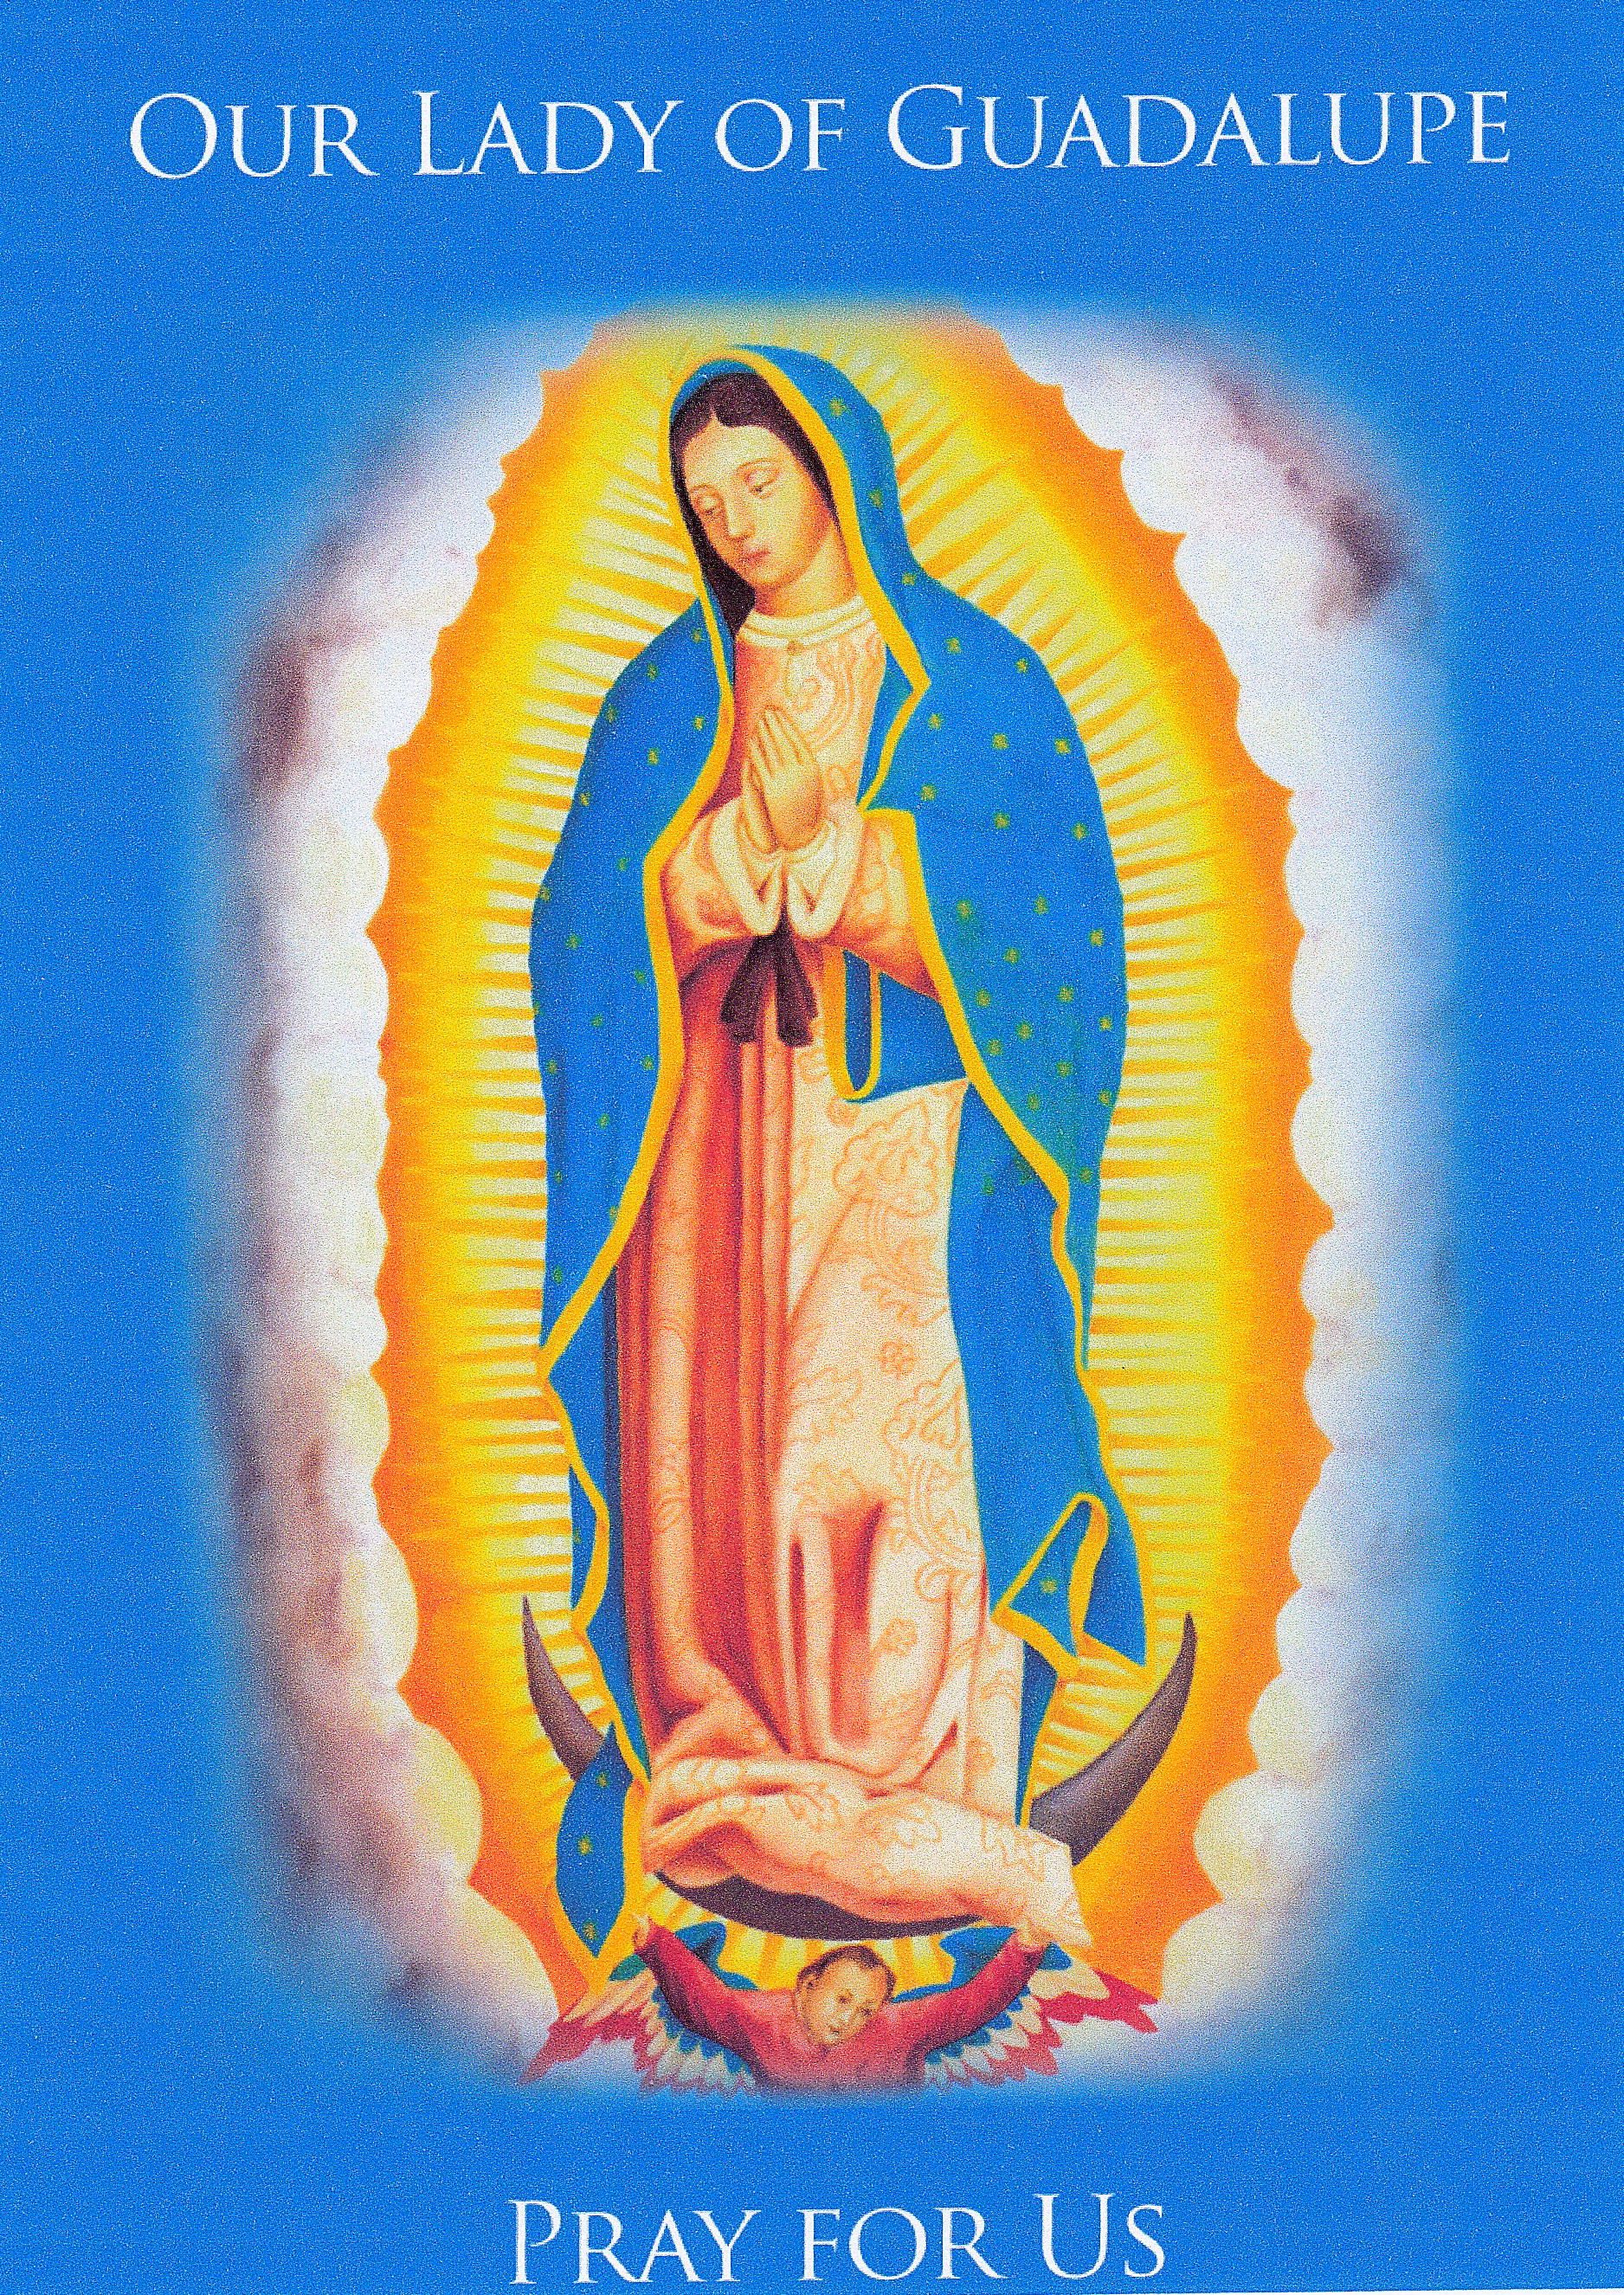 Respect Life Sunday and Our Lady of Guadalupe